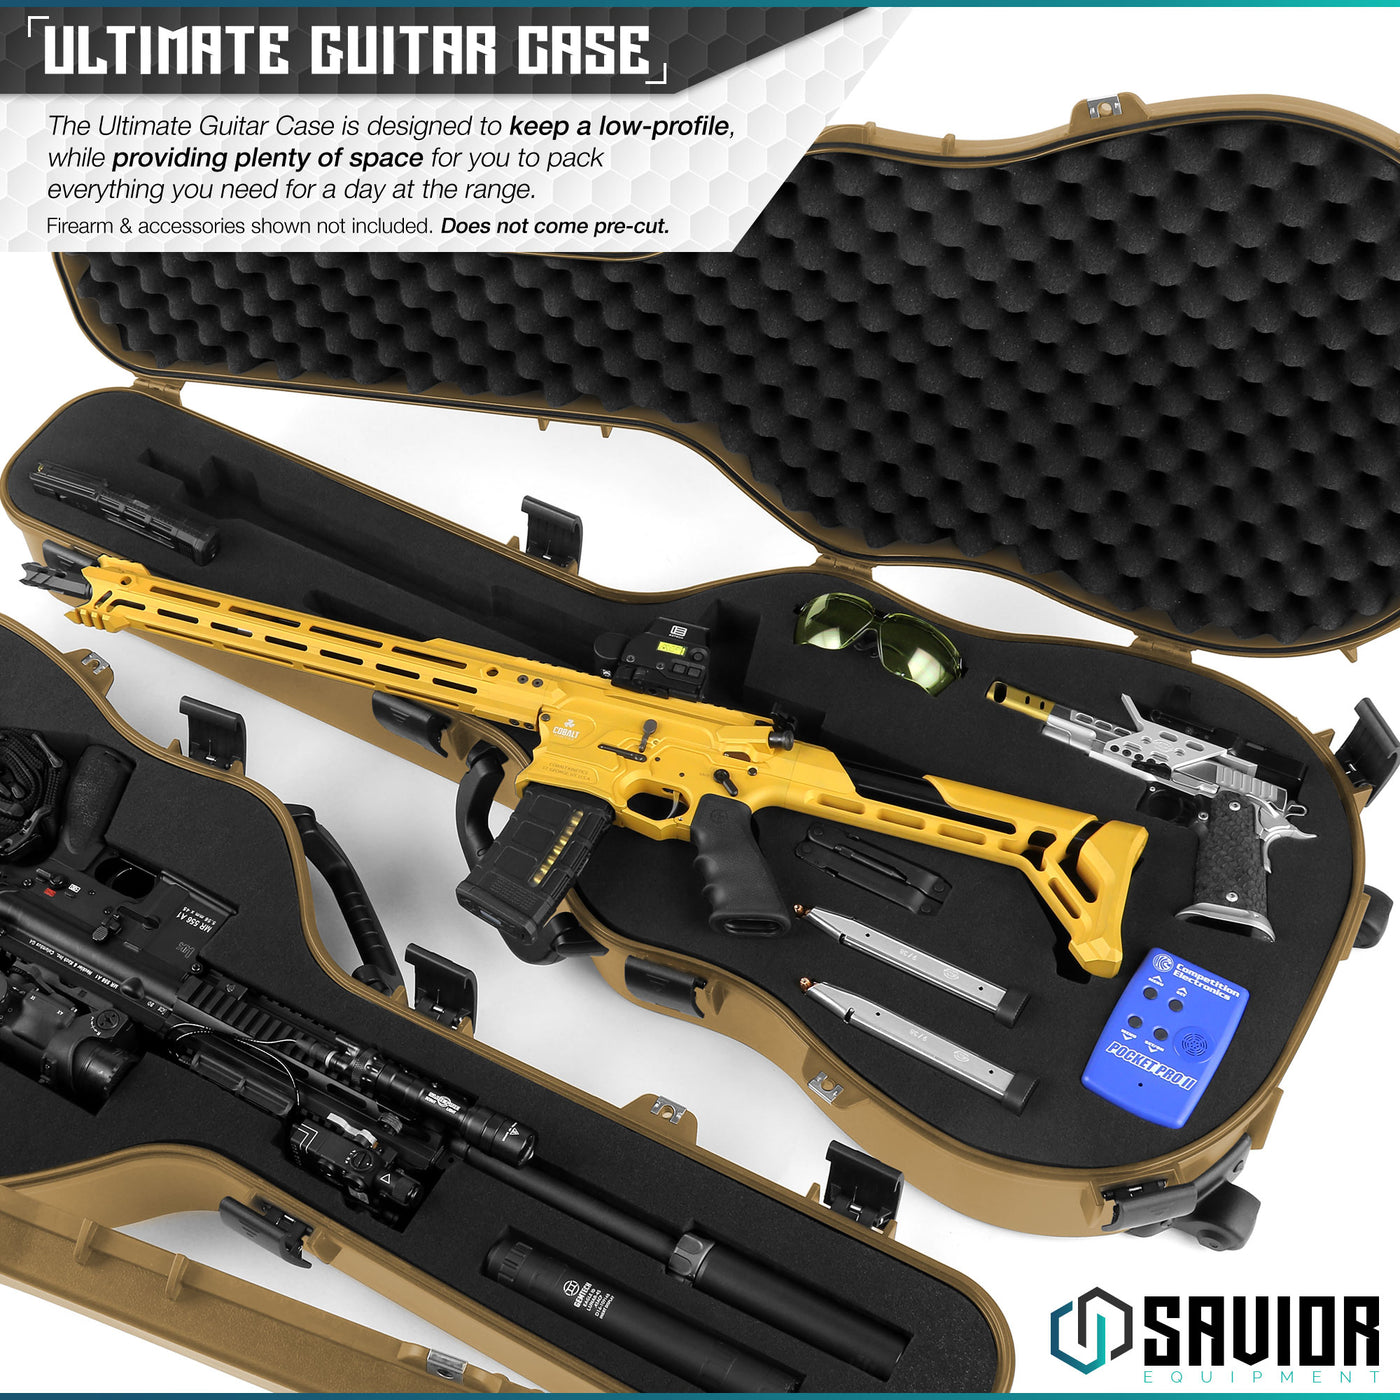 Ultimate Guitar Case - The Ultimate Guitar Case is Designed to Keep a Low-Profile, while Providing Plenty of Space For You to Pack Everything You Need For a Day at the Range. Firearms & Accessories shown not included. Does not come pre-cut.